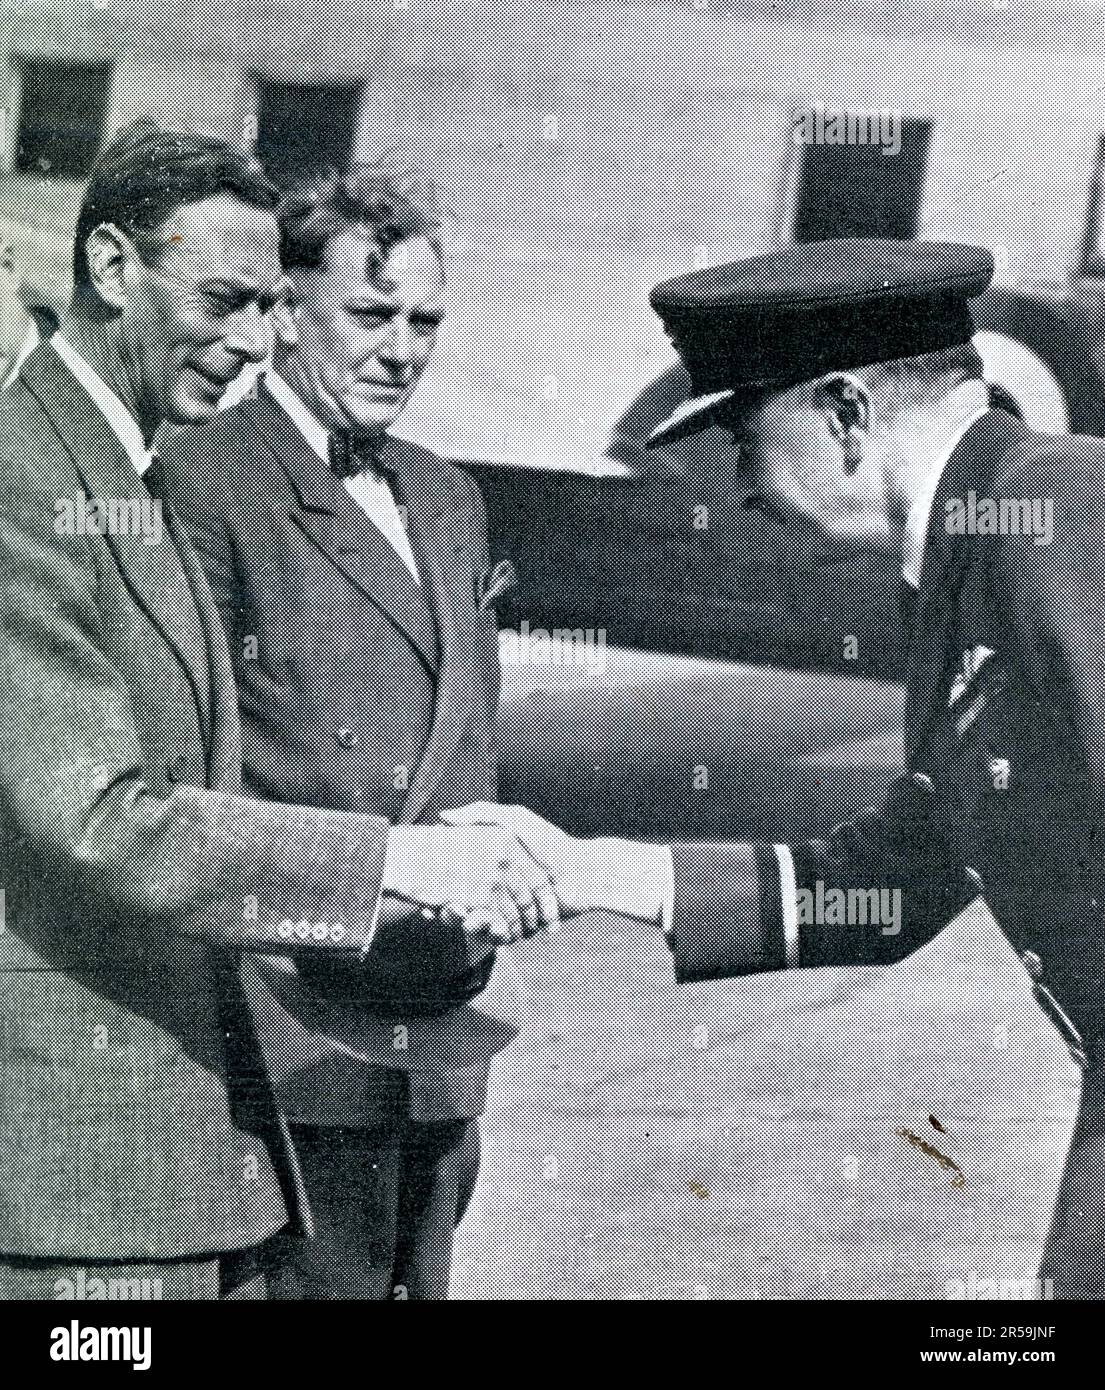 On 8th September 1951 King George VI made a one day visit from Balmoral, where he was holidaying to London for an examination by doctors. Here he is seen at London airport on the return journey to join the royal family on holiday at Balmoral, Scotland, U.K. This press photo was taken just a few months before the King's early death in February 1952, aged just 56. Stock Photo